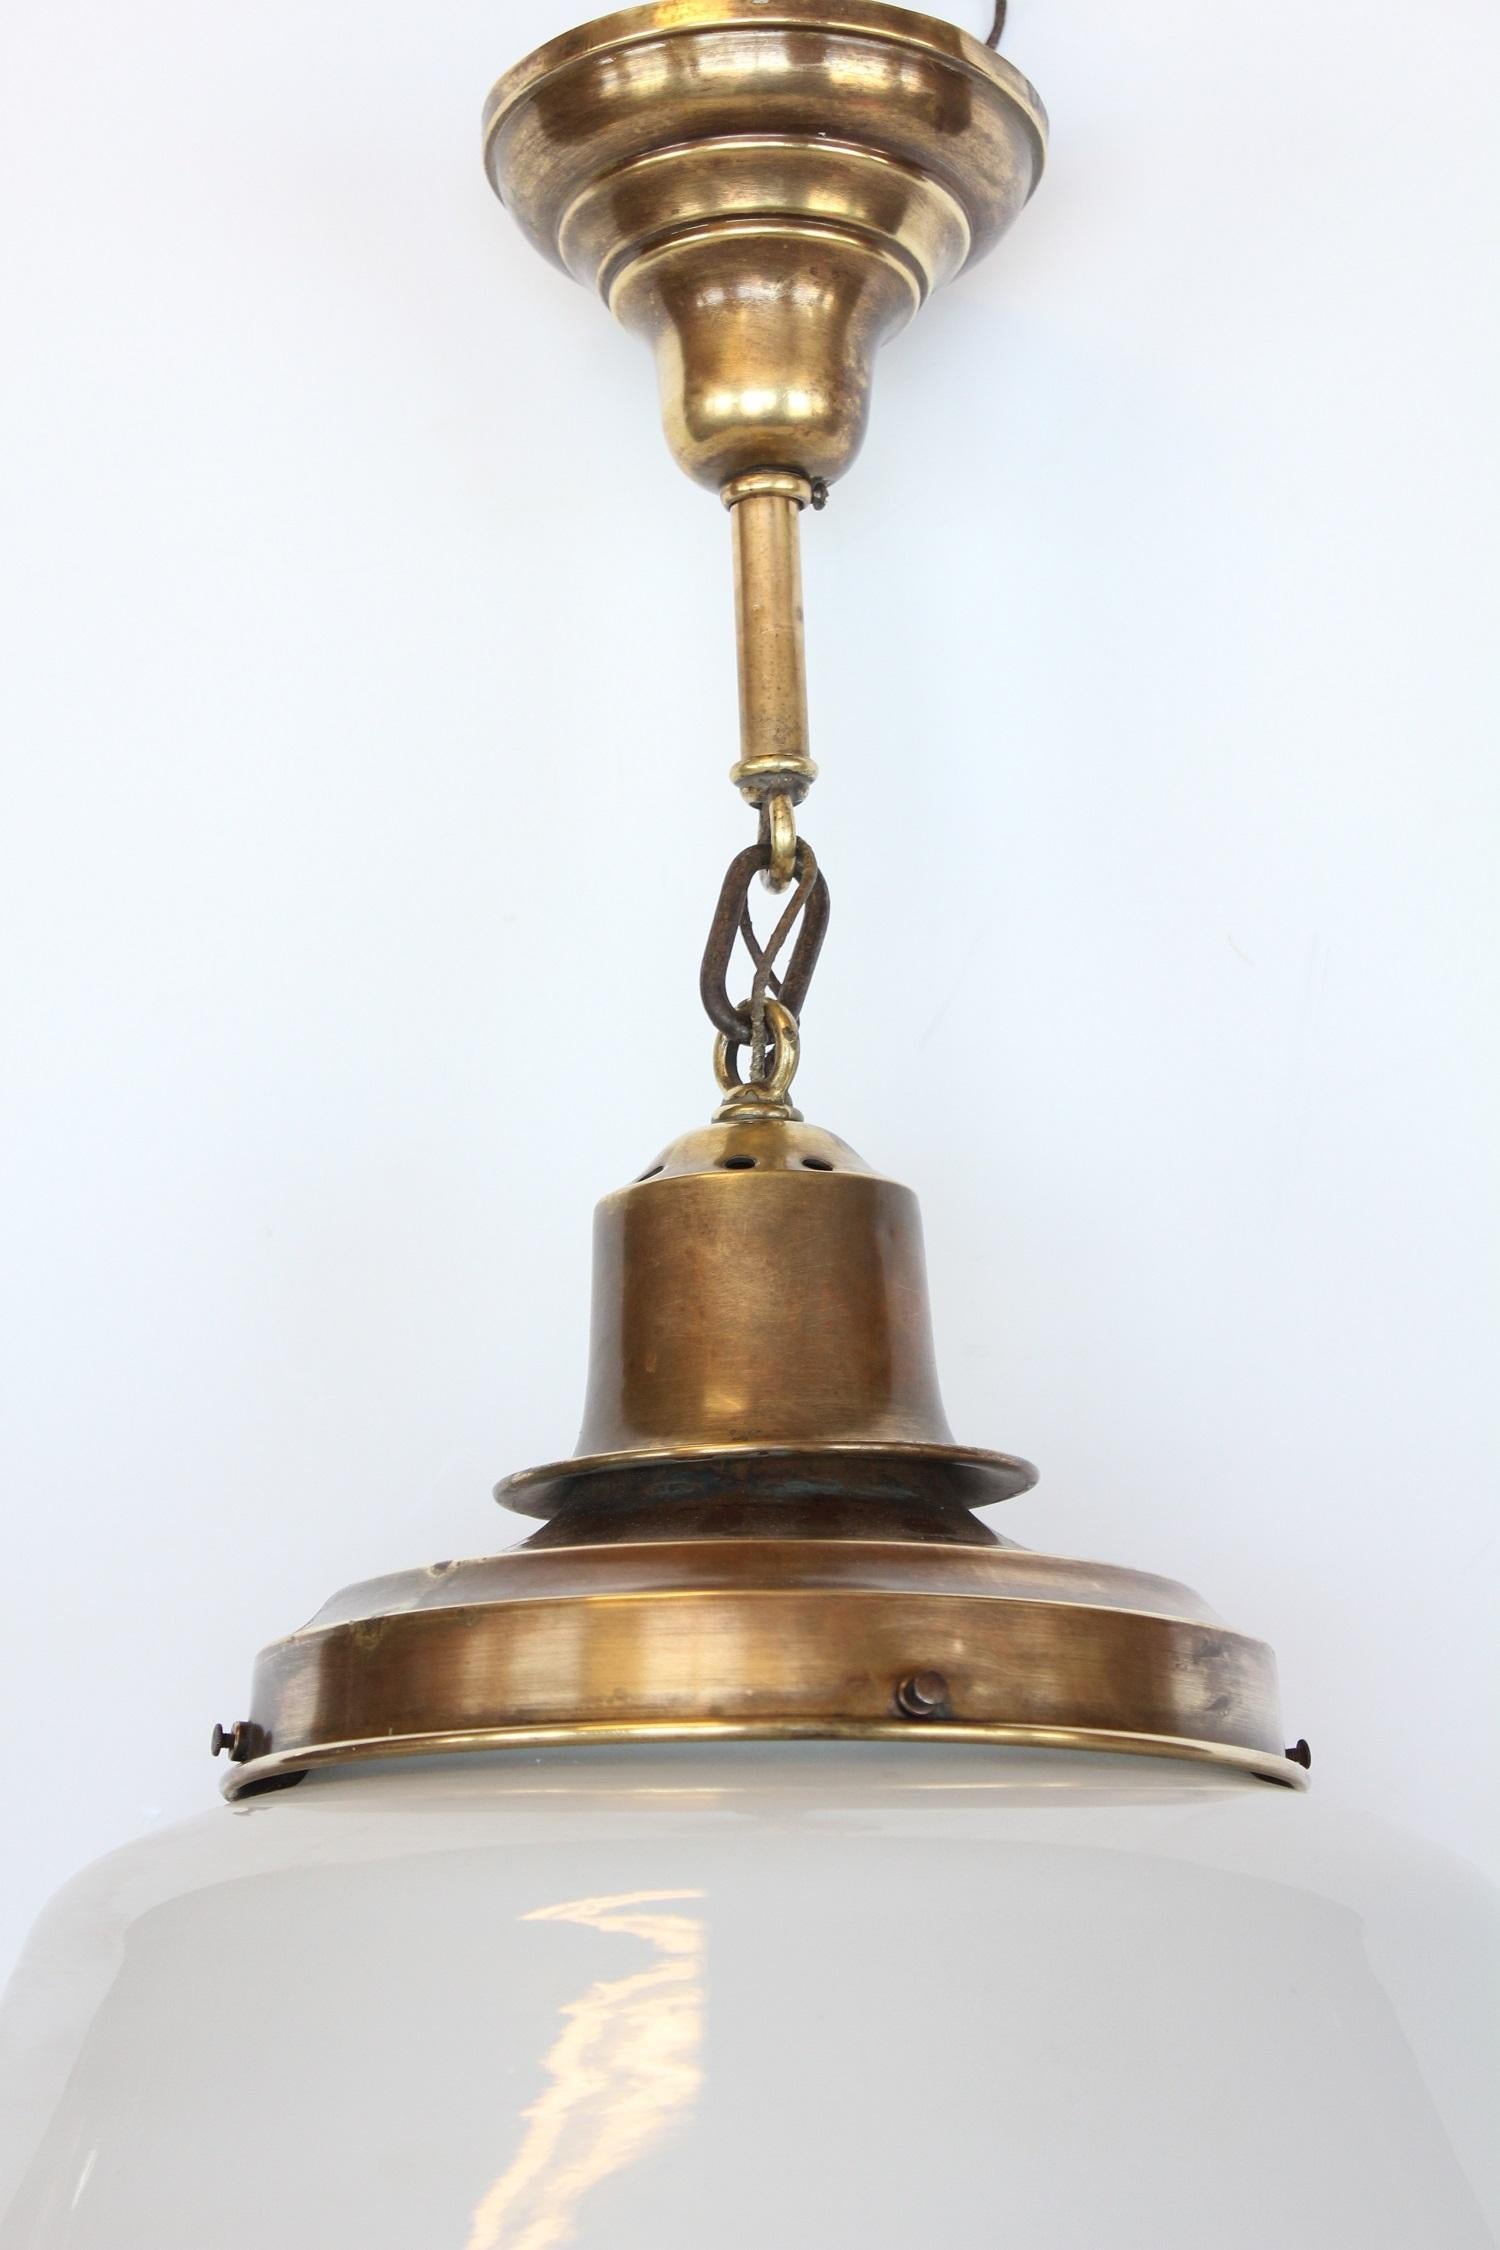 Over sized antique school light with milk glass shade and brass hardware. Four-lights available. Listed price is for each light